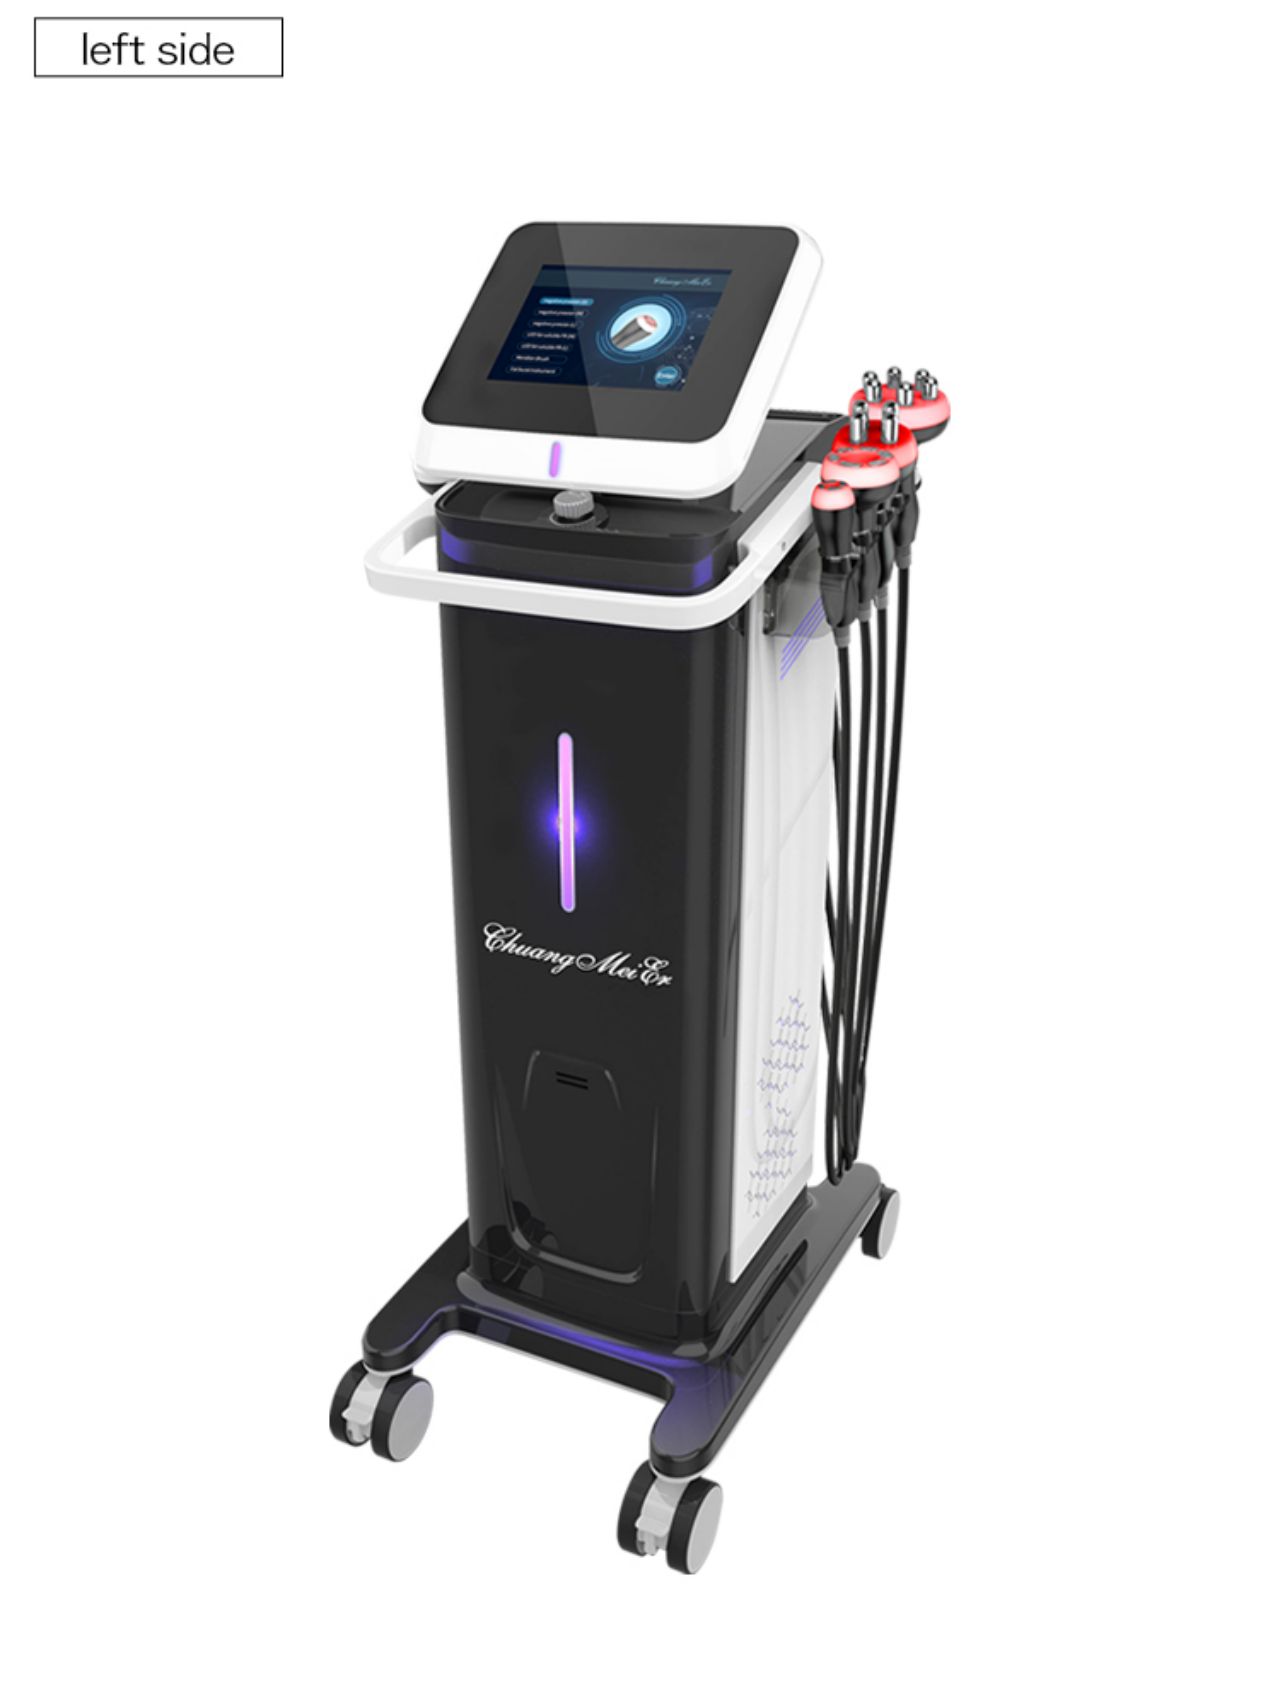 Vacuum RF therapy is a non-inv11